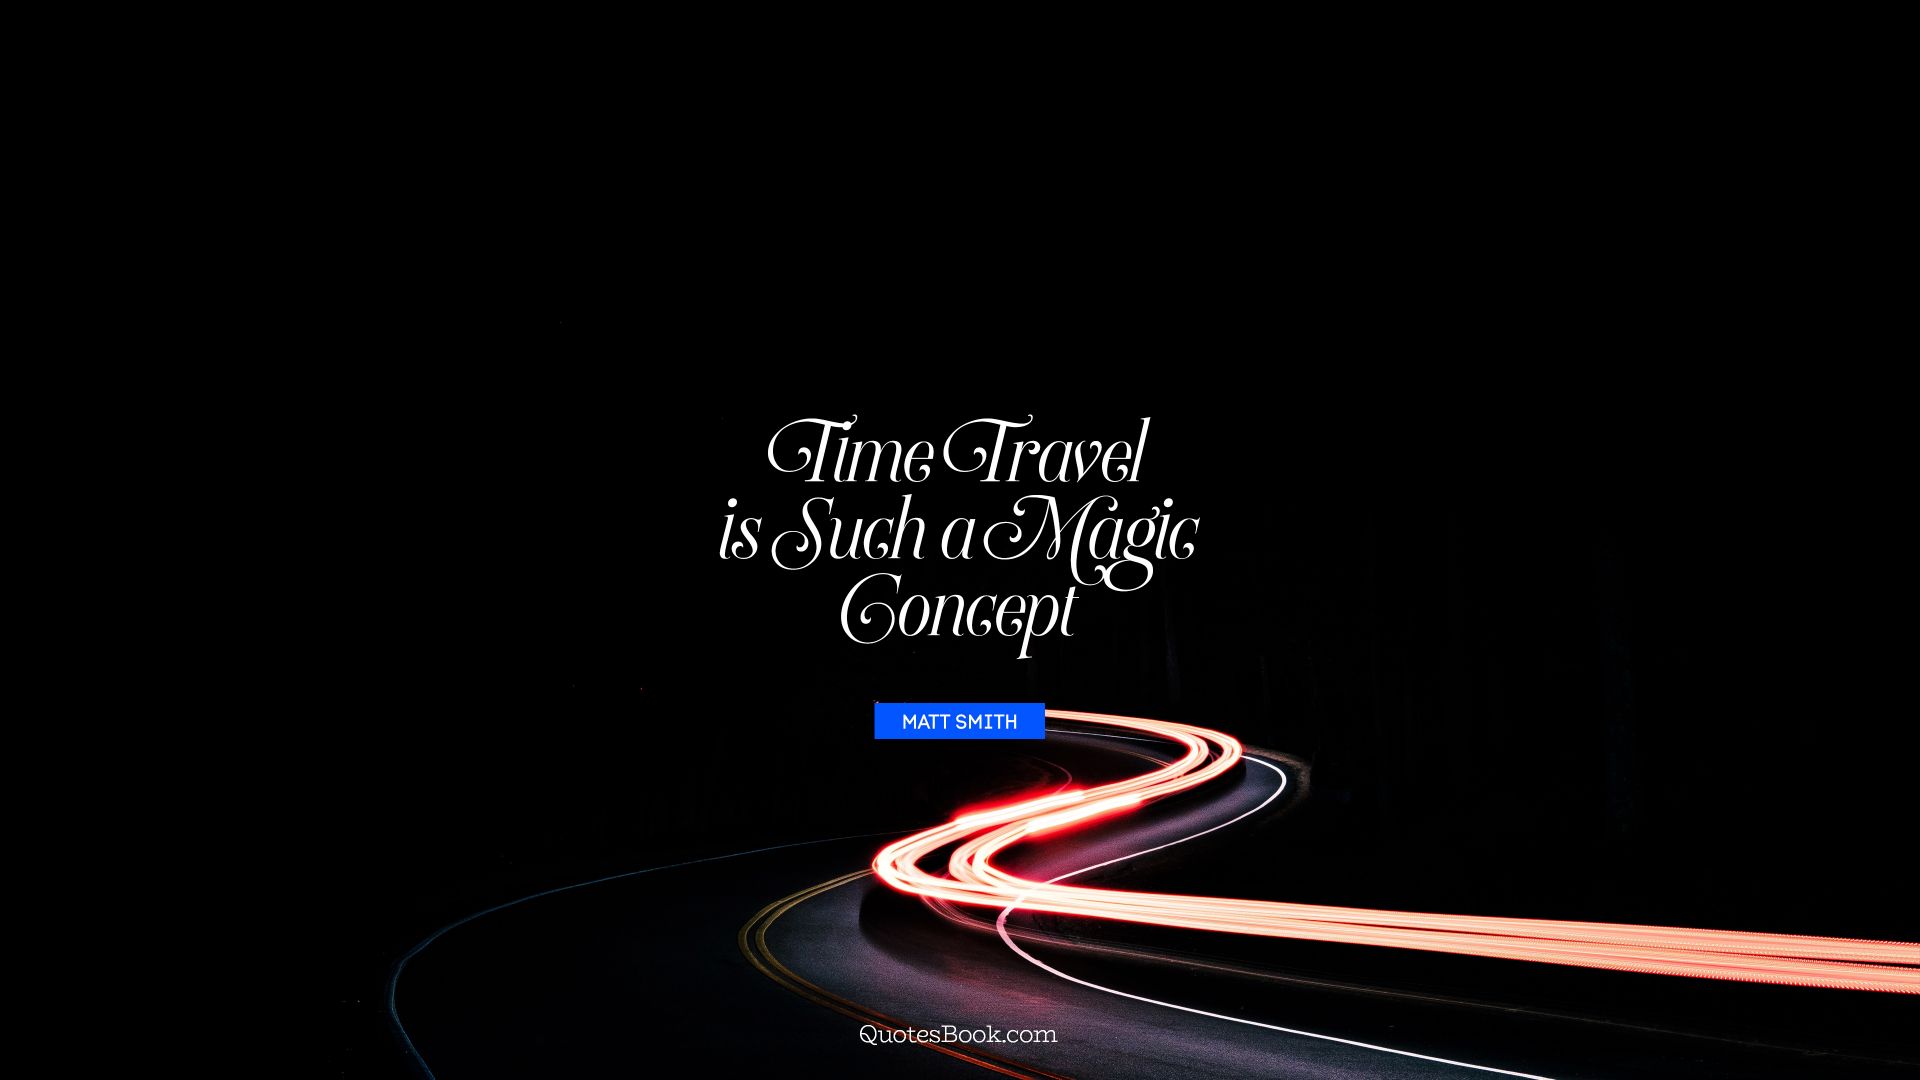 Time travel is such a magic concept. - Quote by Matt Smith